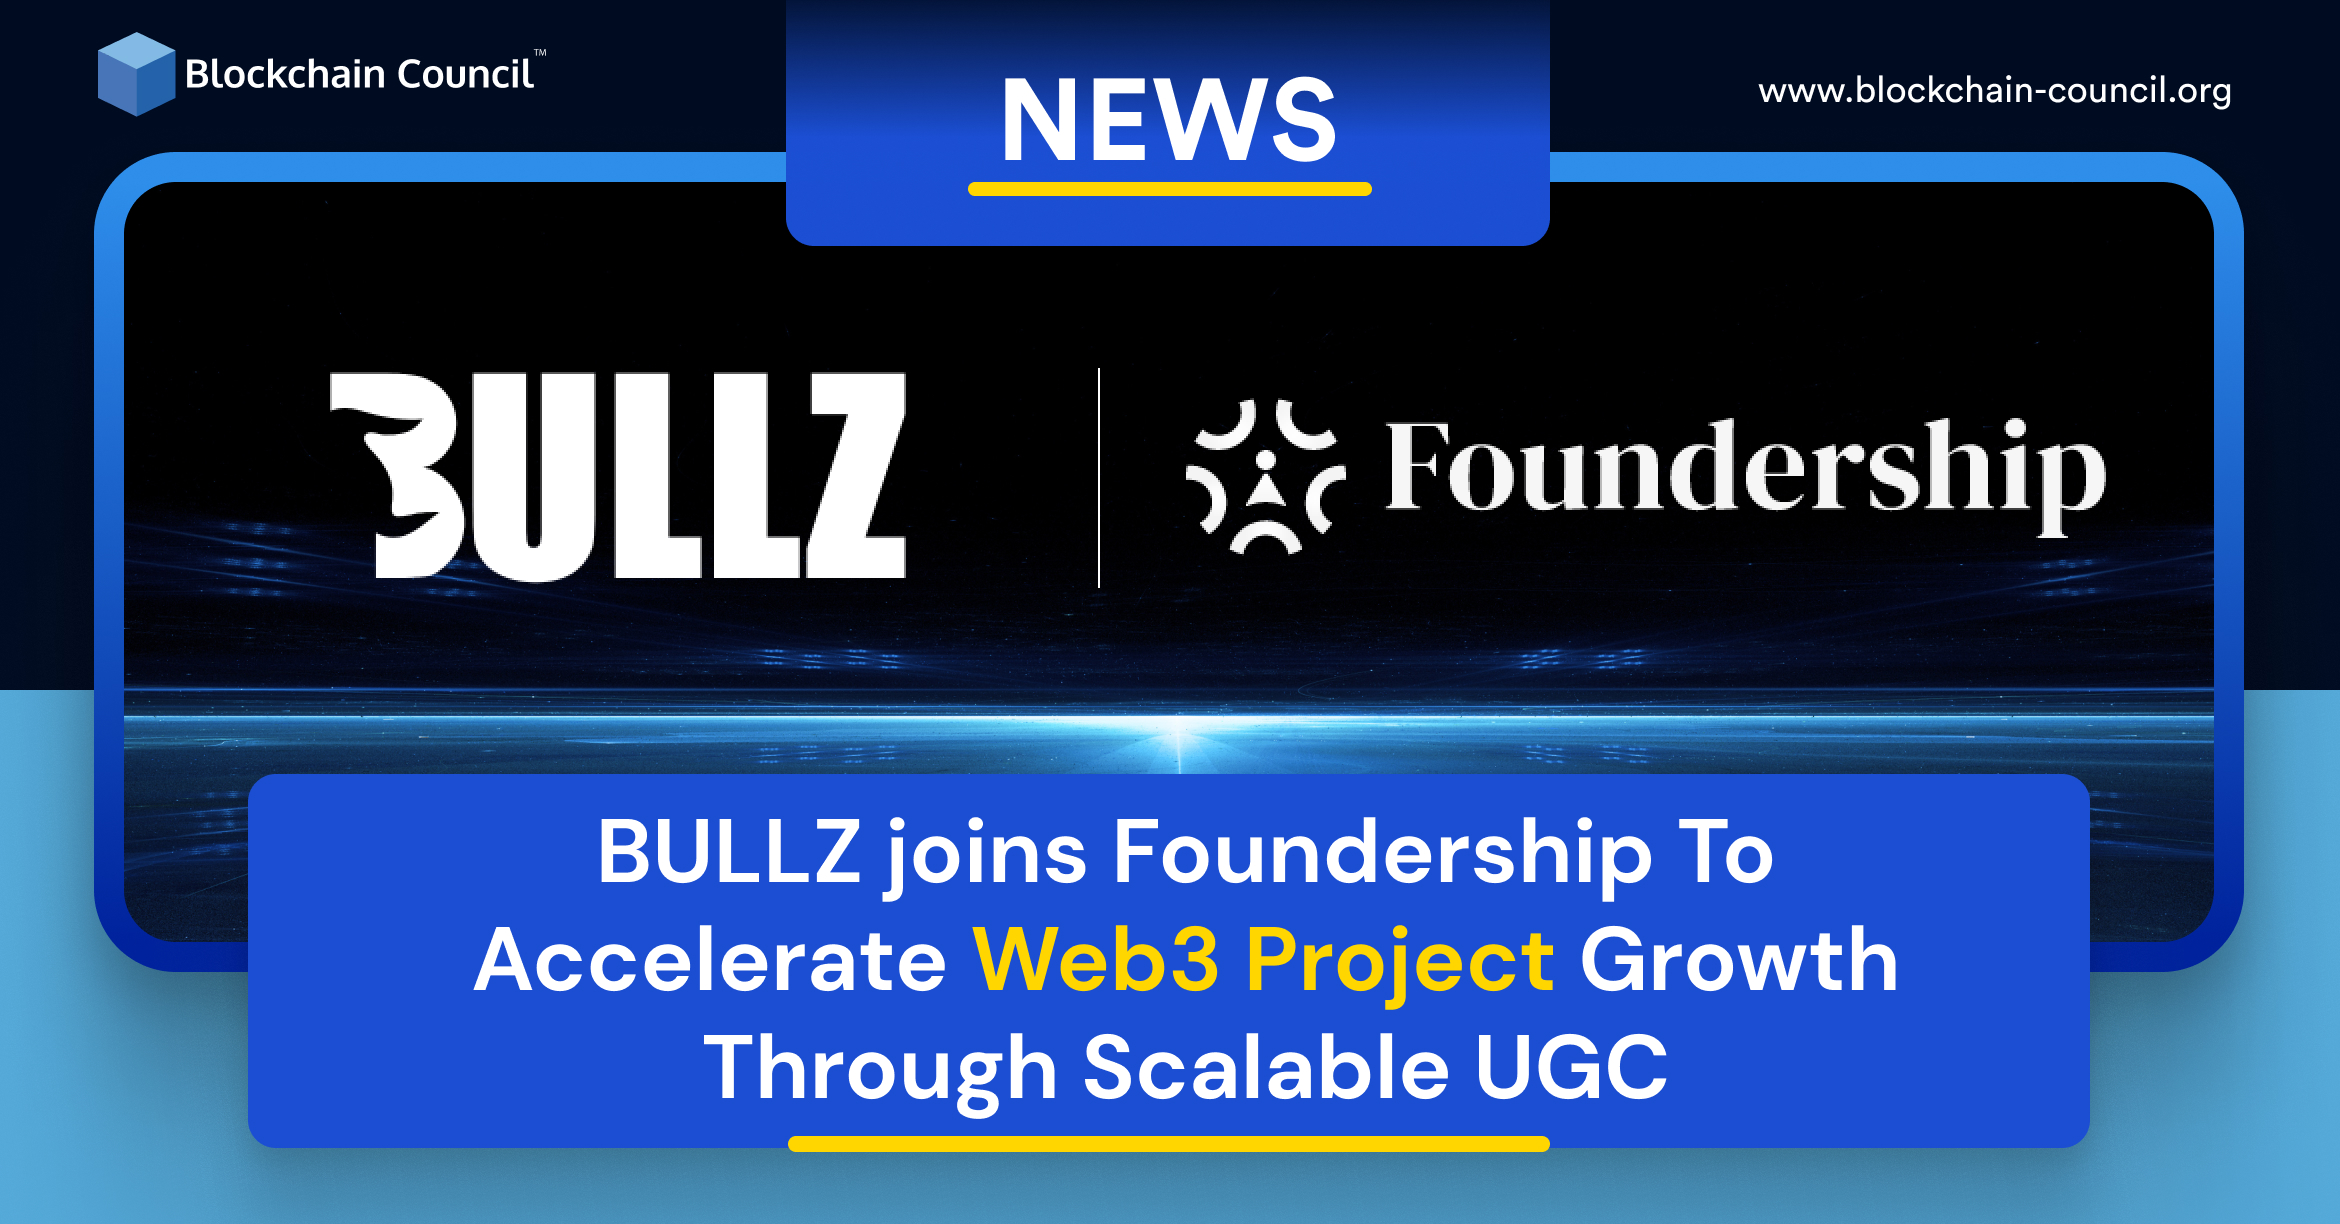 BULLZ joins Foundership To Accelerate Web3 Project Growth Through Scalable UGC